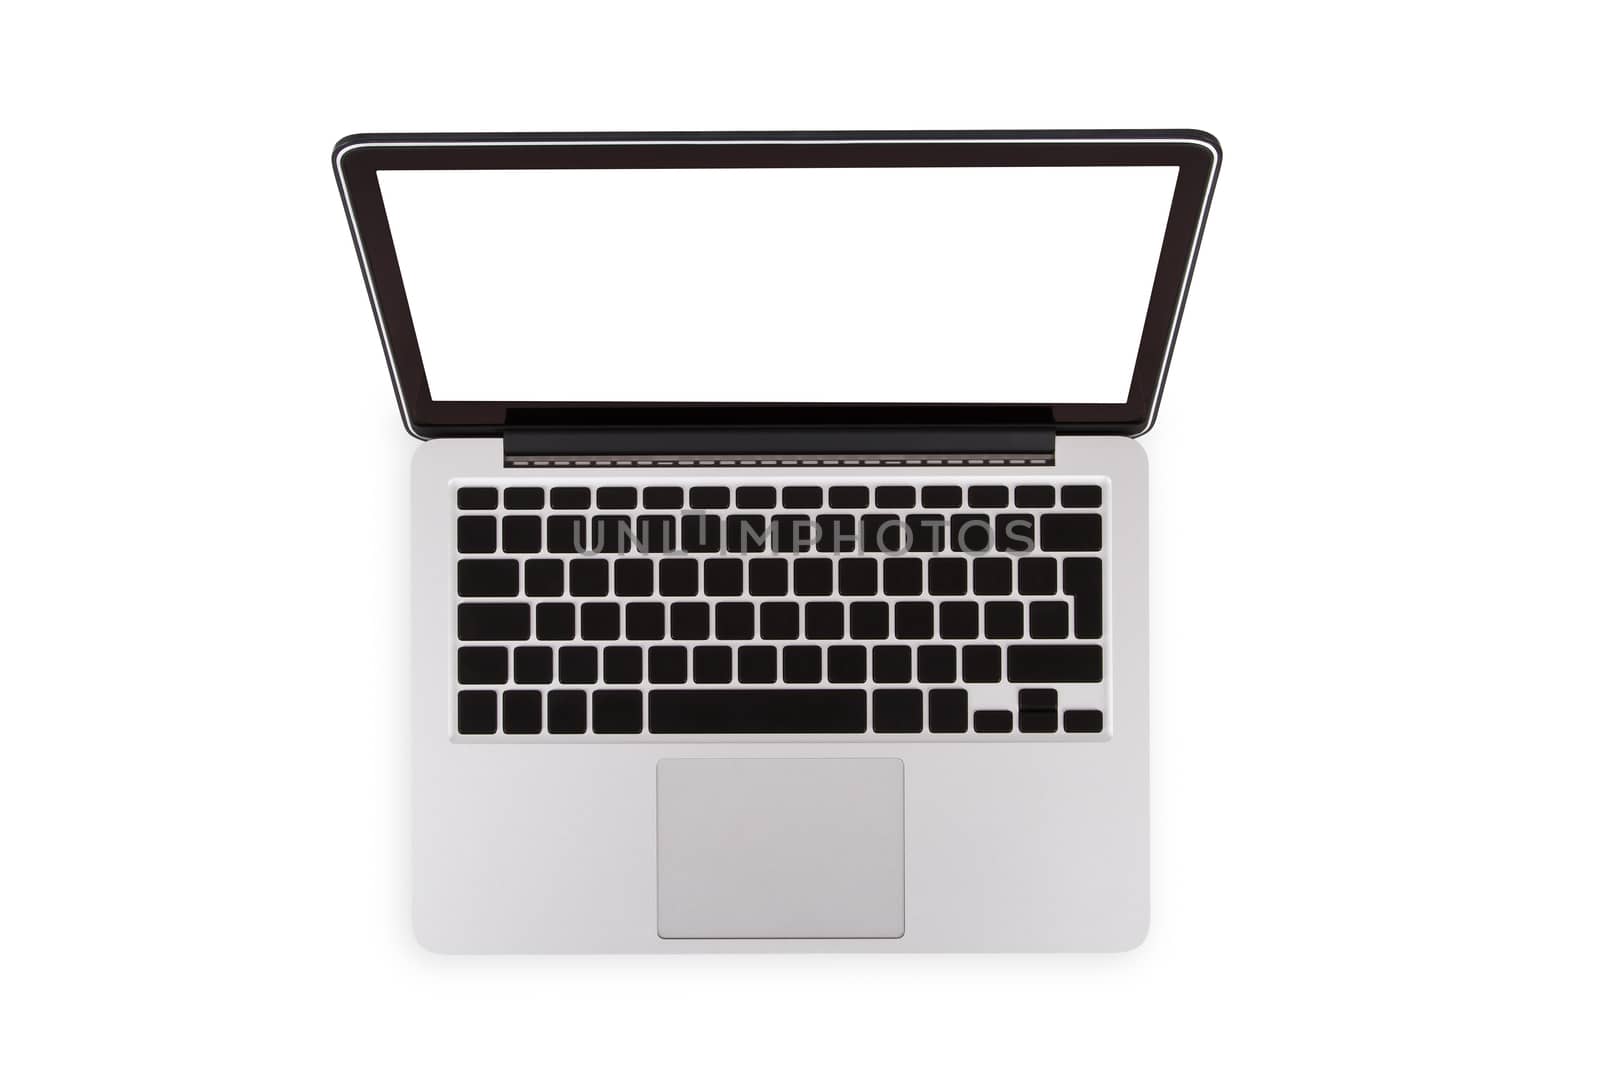 Top view of single laptop, isolated on white background.